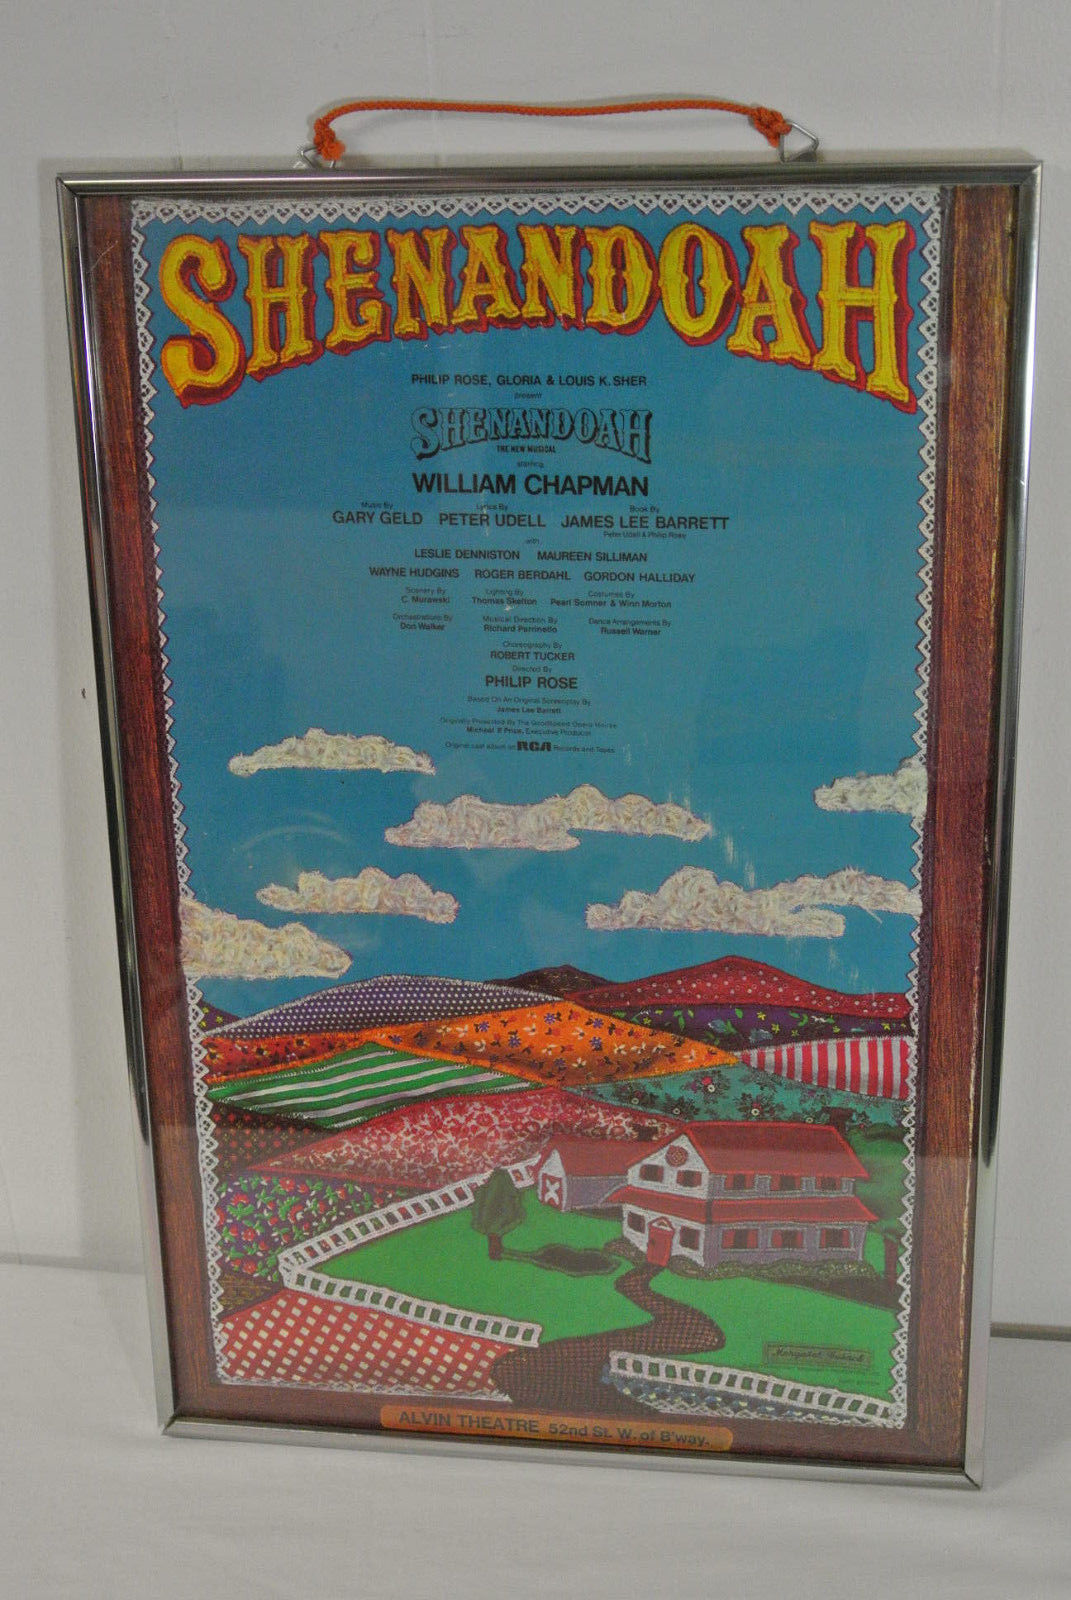 SHENANDOAH POSTER WINDOW CARD THEATER BROADWAY THICK CARD STOCK FRAMED 1st Ed.